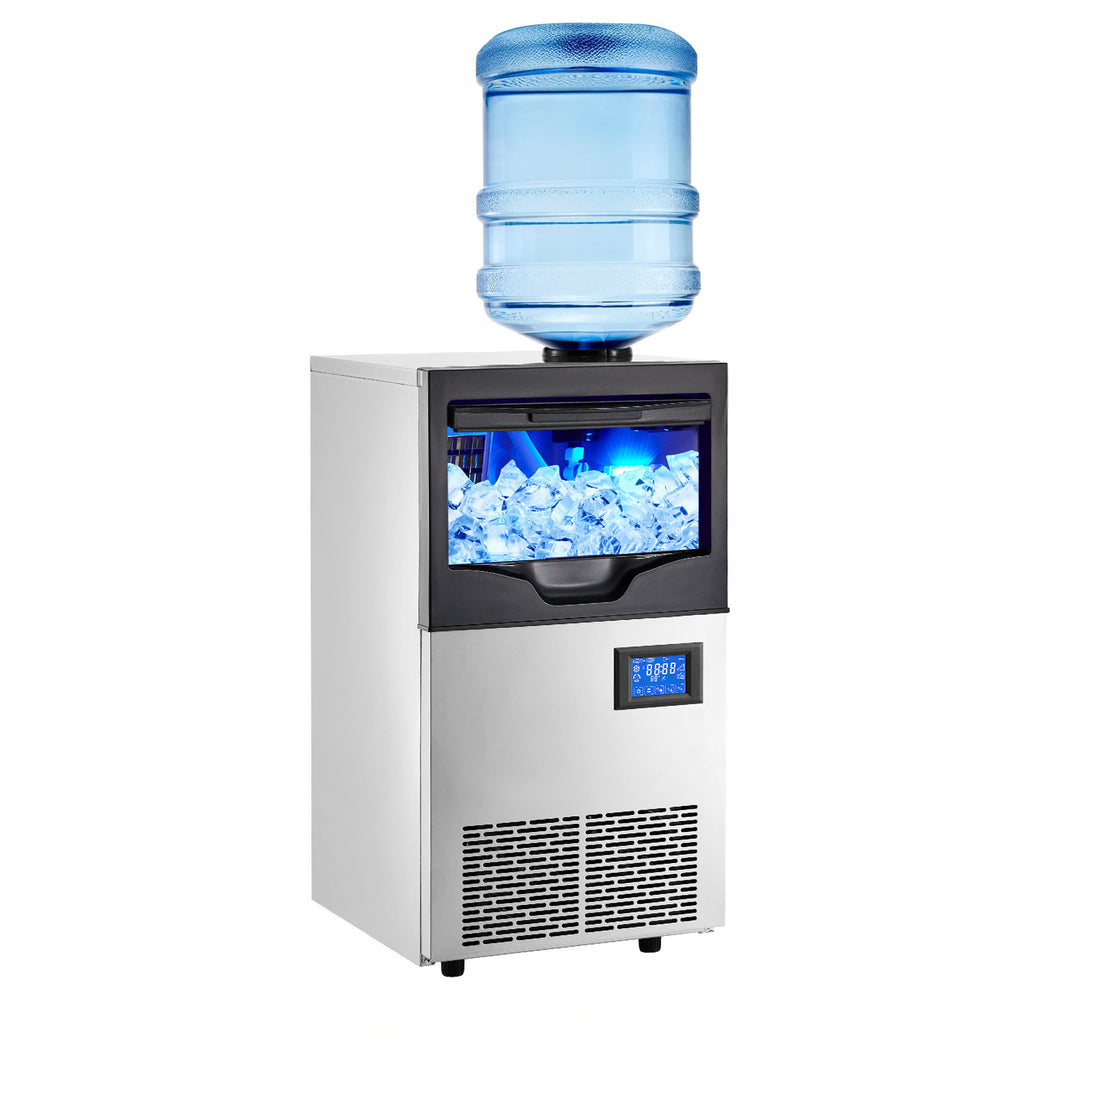 GARVEE 140Lbs/24H, Commercial Ice Maker, 22Lbs Bin, 0.9" Thick Ice, Auto-Cleaning, 2-Way Water Add; Great for Home, Bar, Hotel, Restaurant